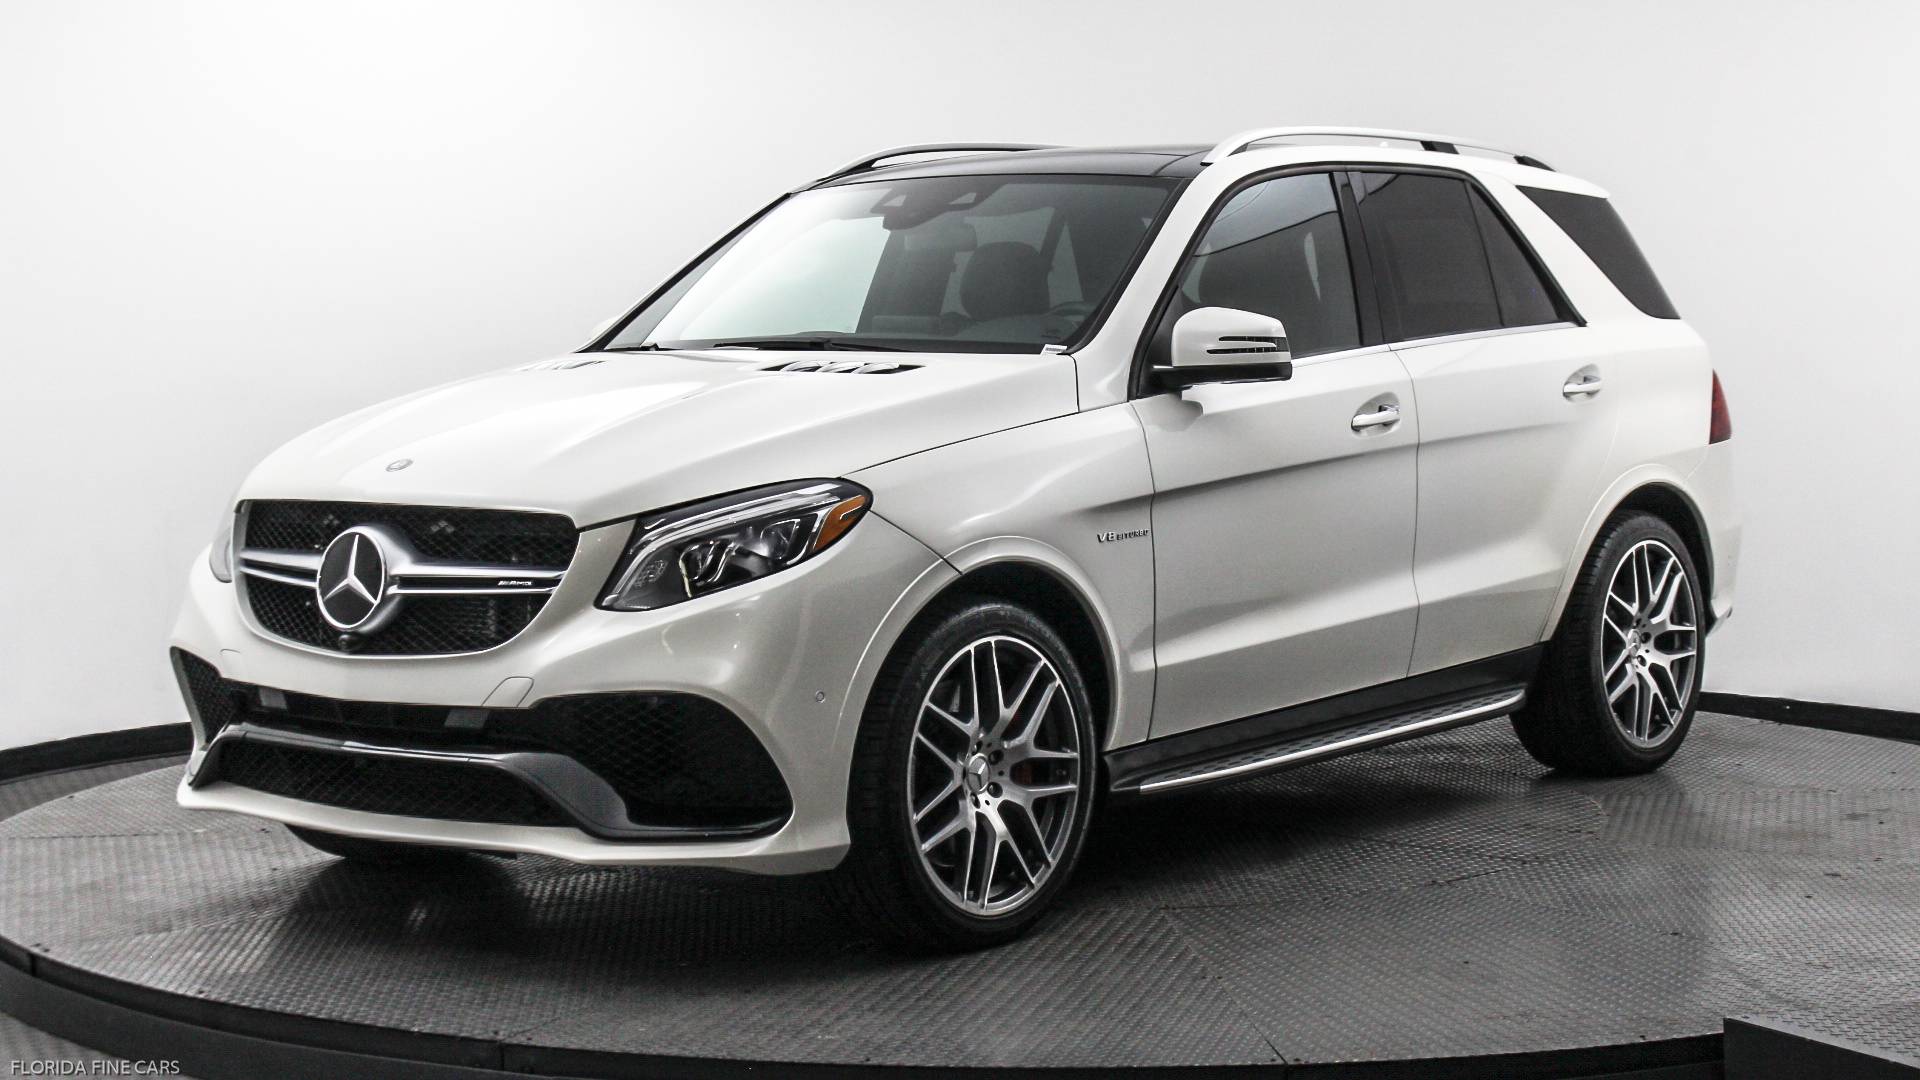 Used 2017 MERCEDES-BENZ GLE AMG GLE 63 S for sale in WEST PALM | 121534